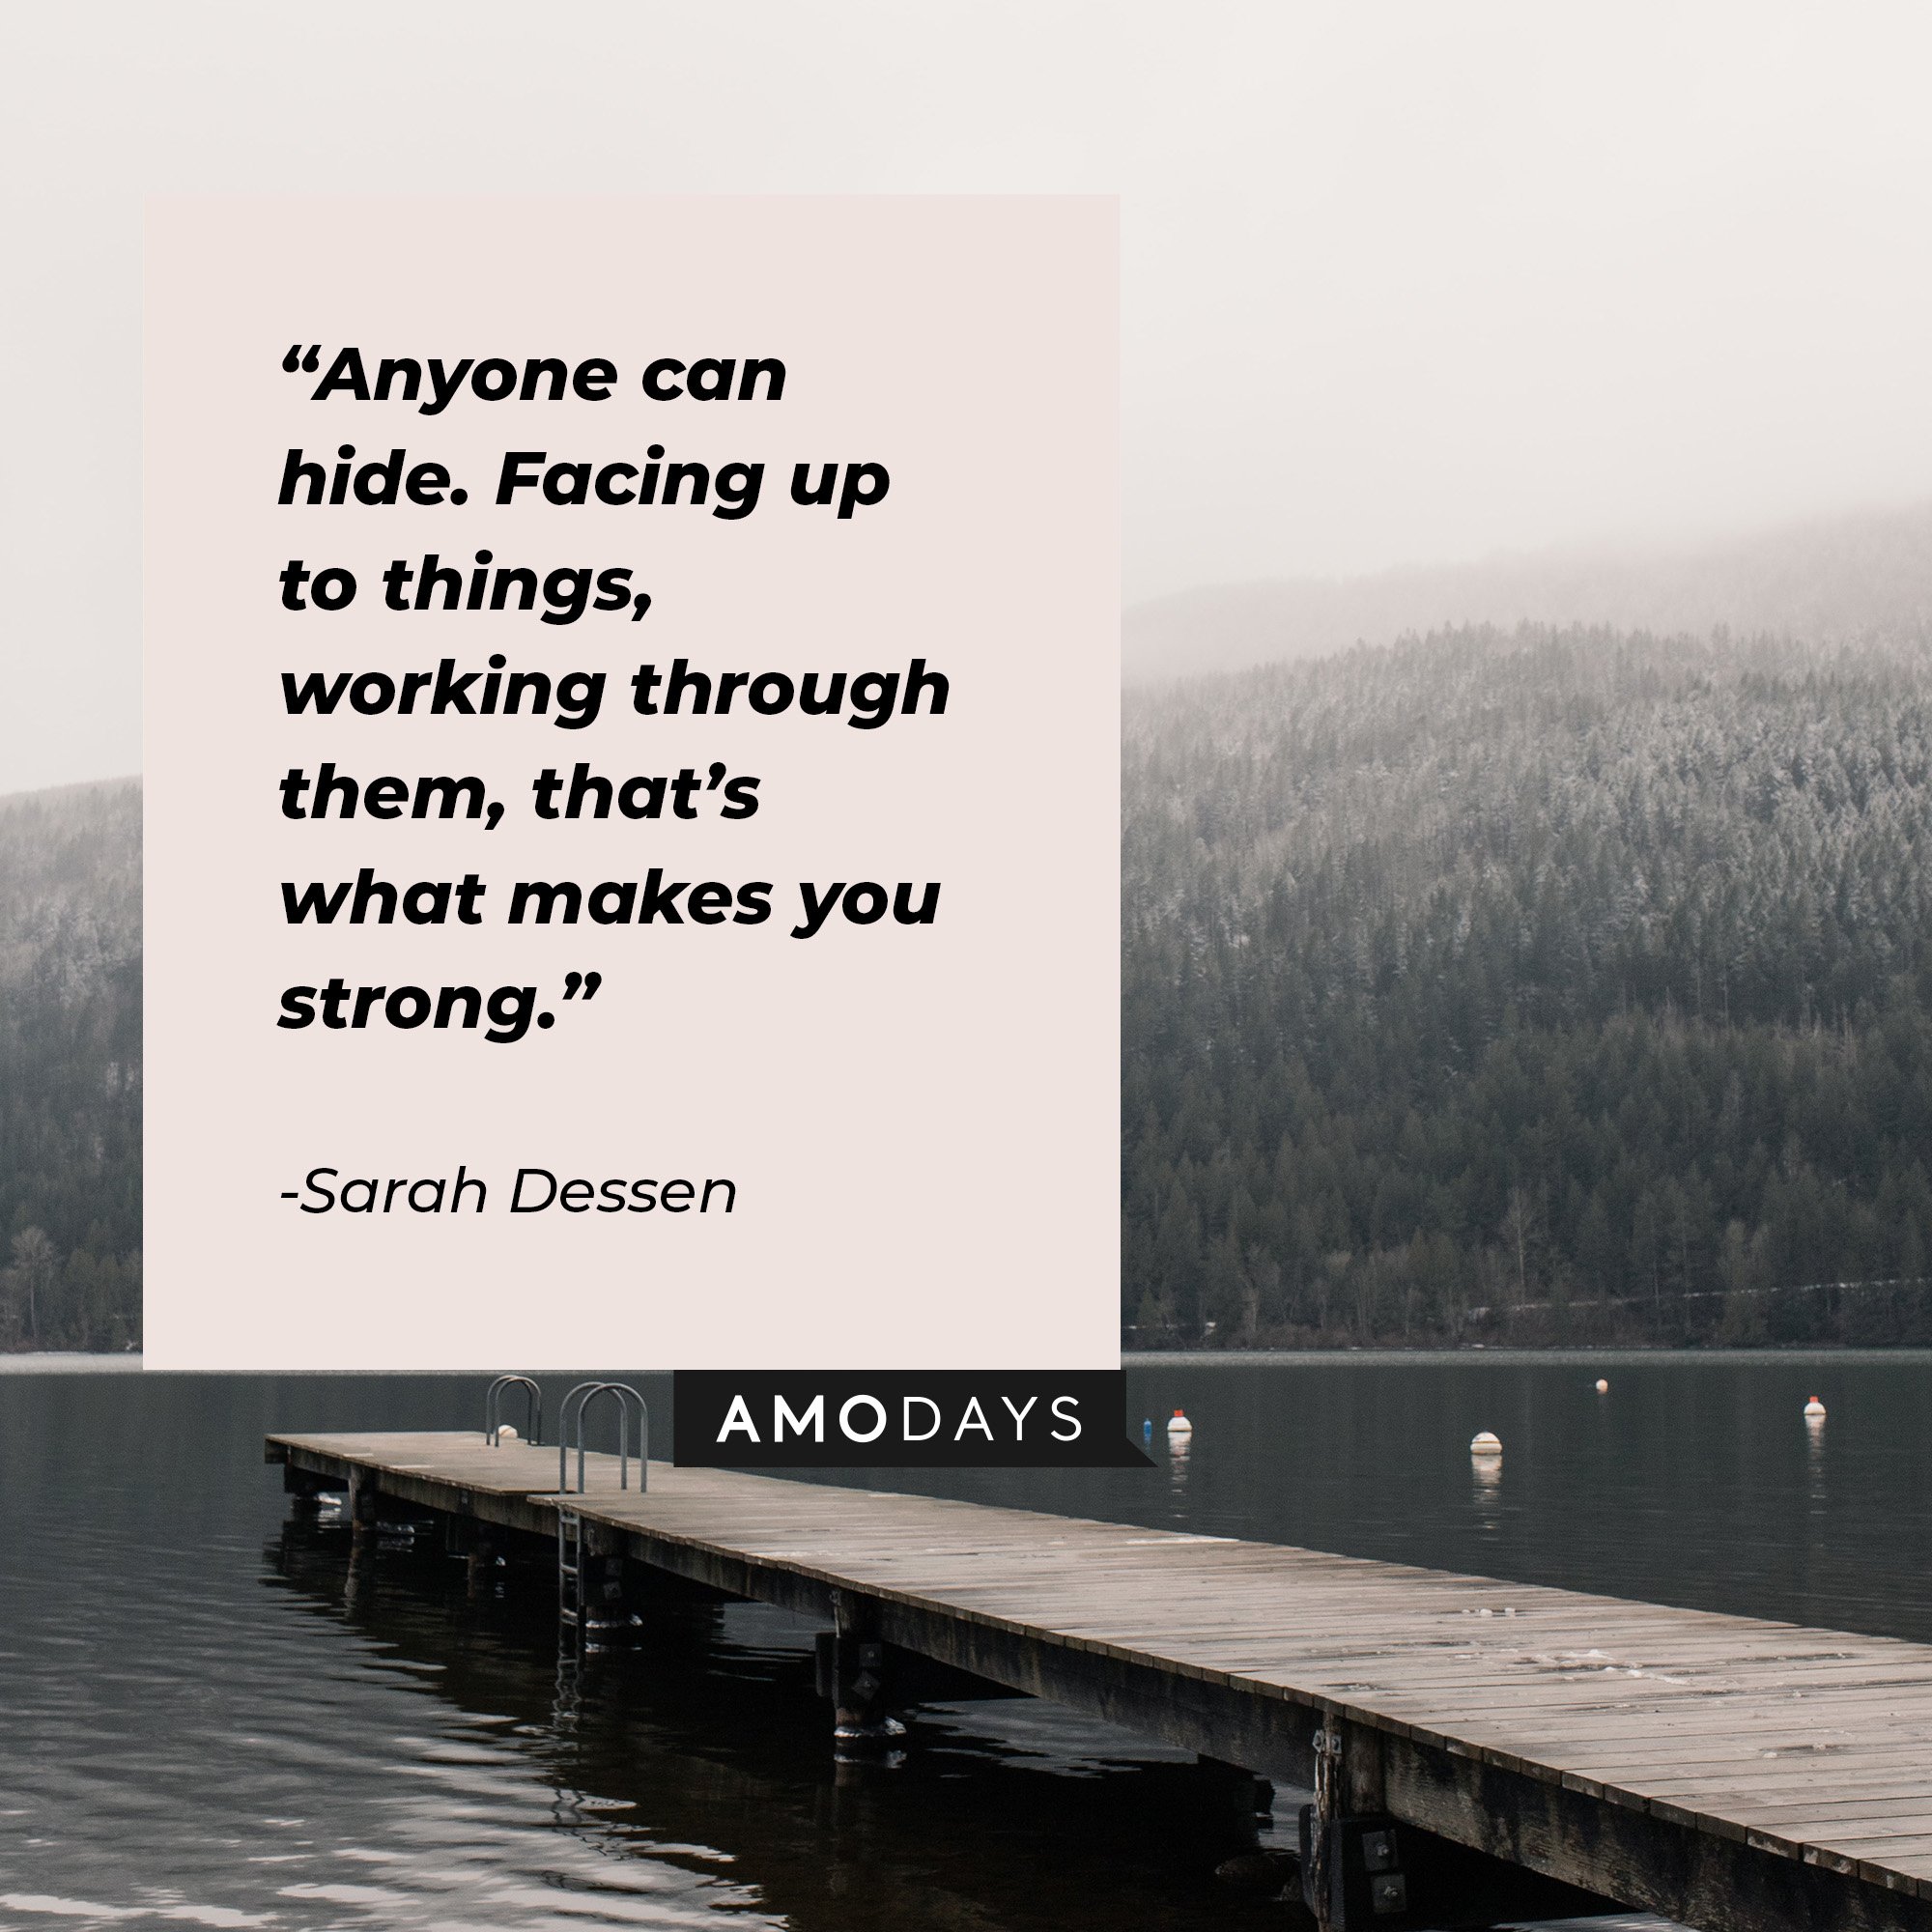 Sarah Dessen’s quote: “Anyone can hide. Facing up to things, working through them, that’s what makes you strong.” | Image: AmoDays  